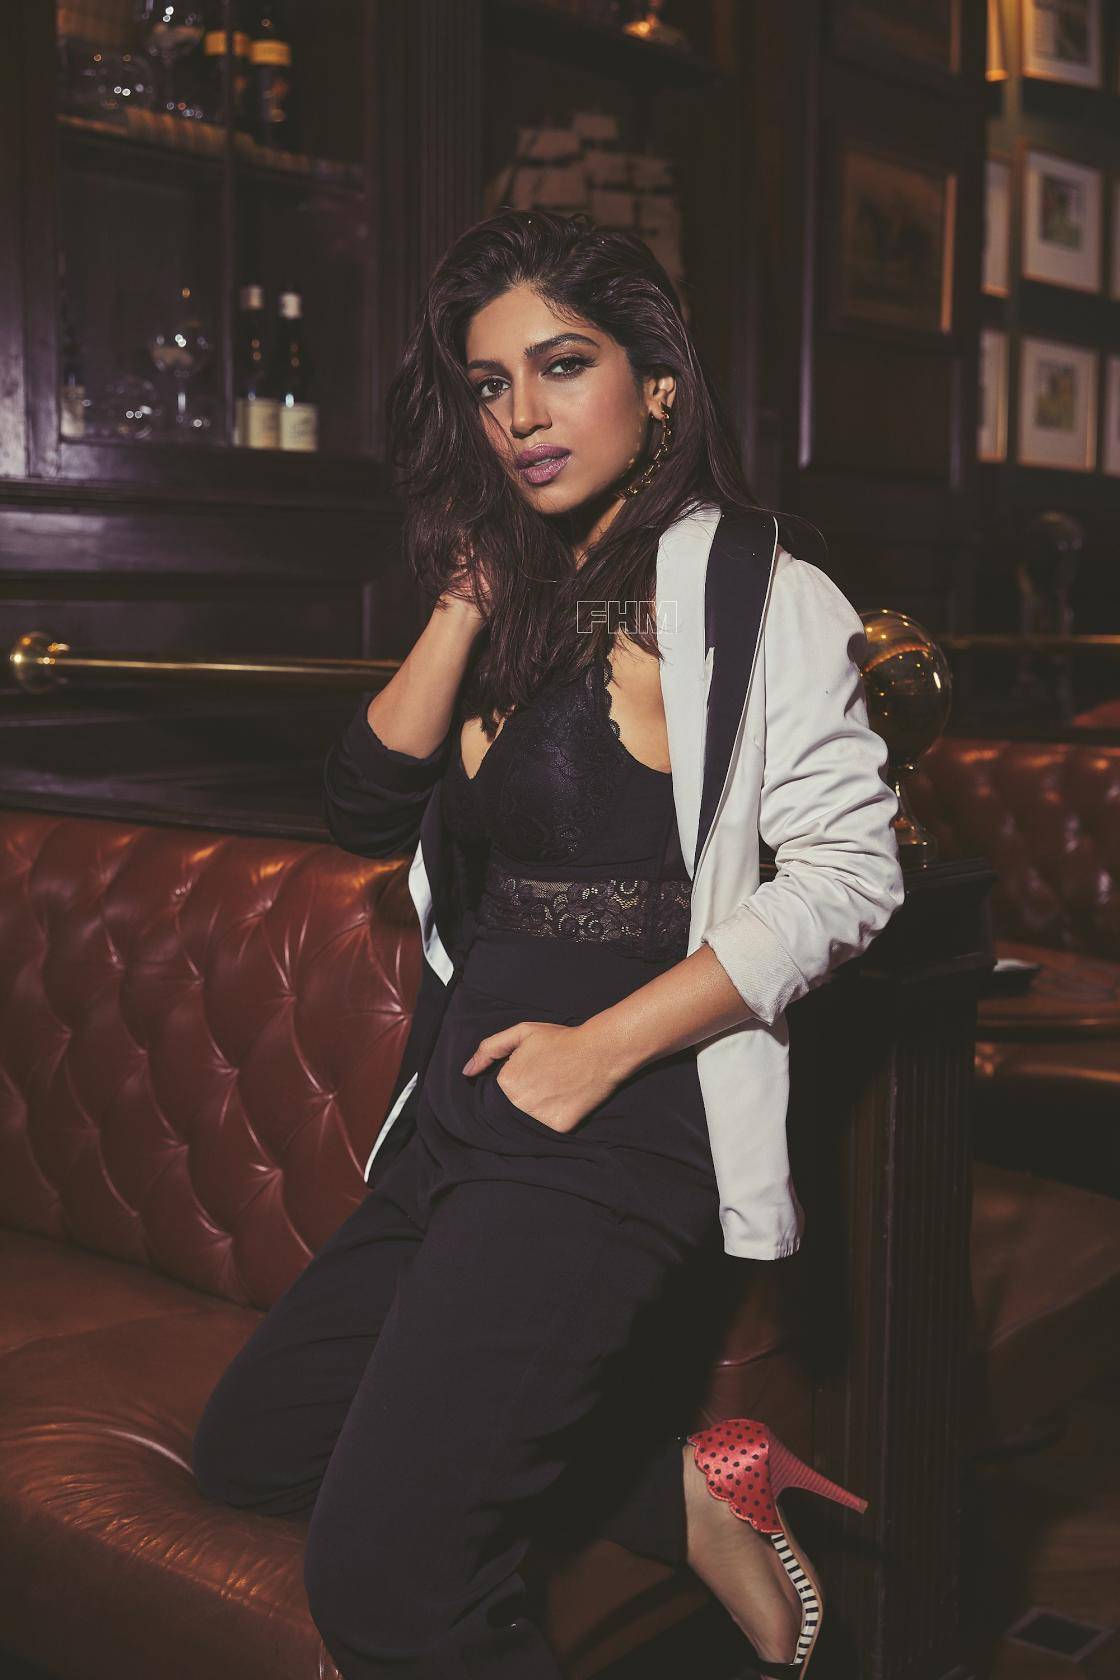 Actress Bhumi Pednekar graced herself with fieriness featured in